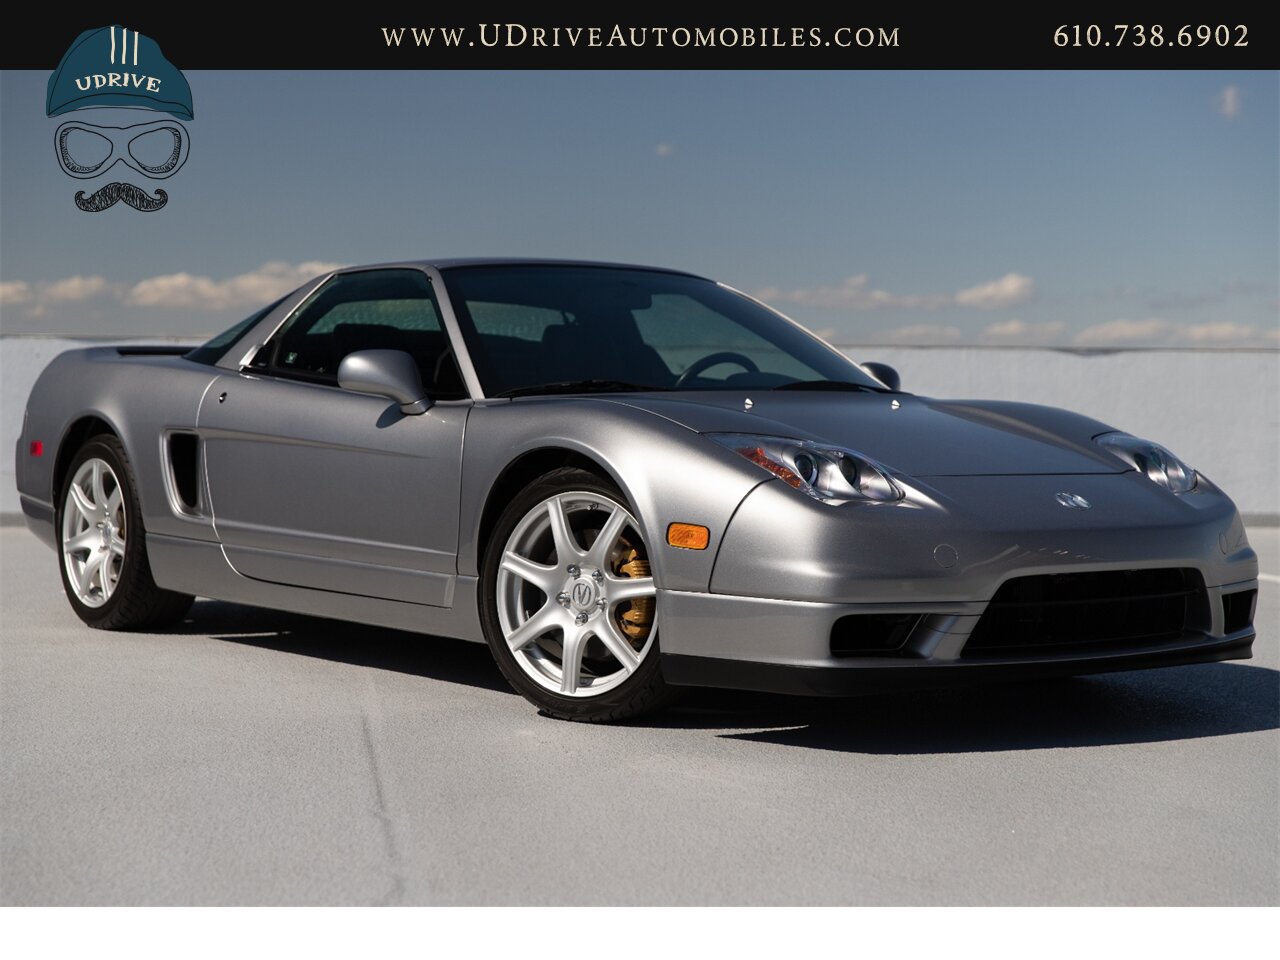 2002 Acura NSX NSX-T 9k Miles 6 Speed Manual Service History  Collector Grade - Photo 4 - West Chester, PA 19382